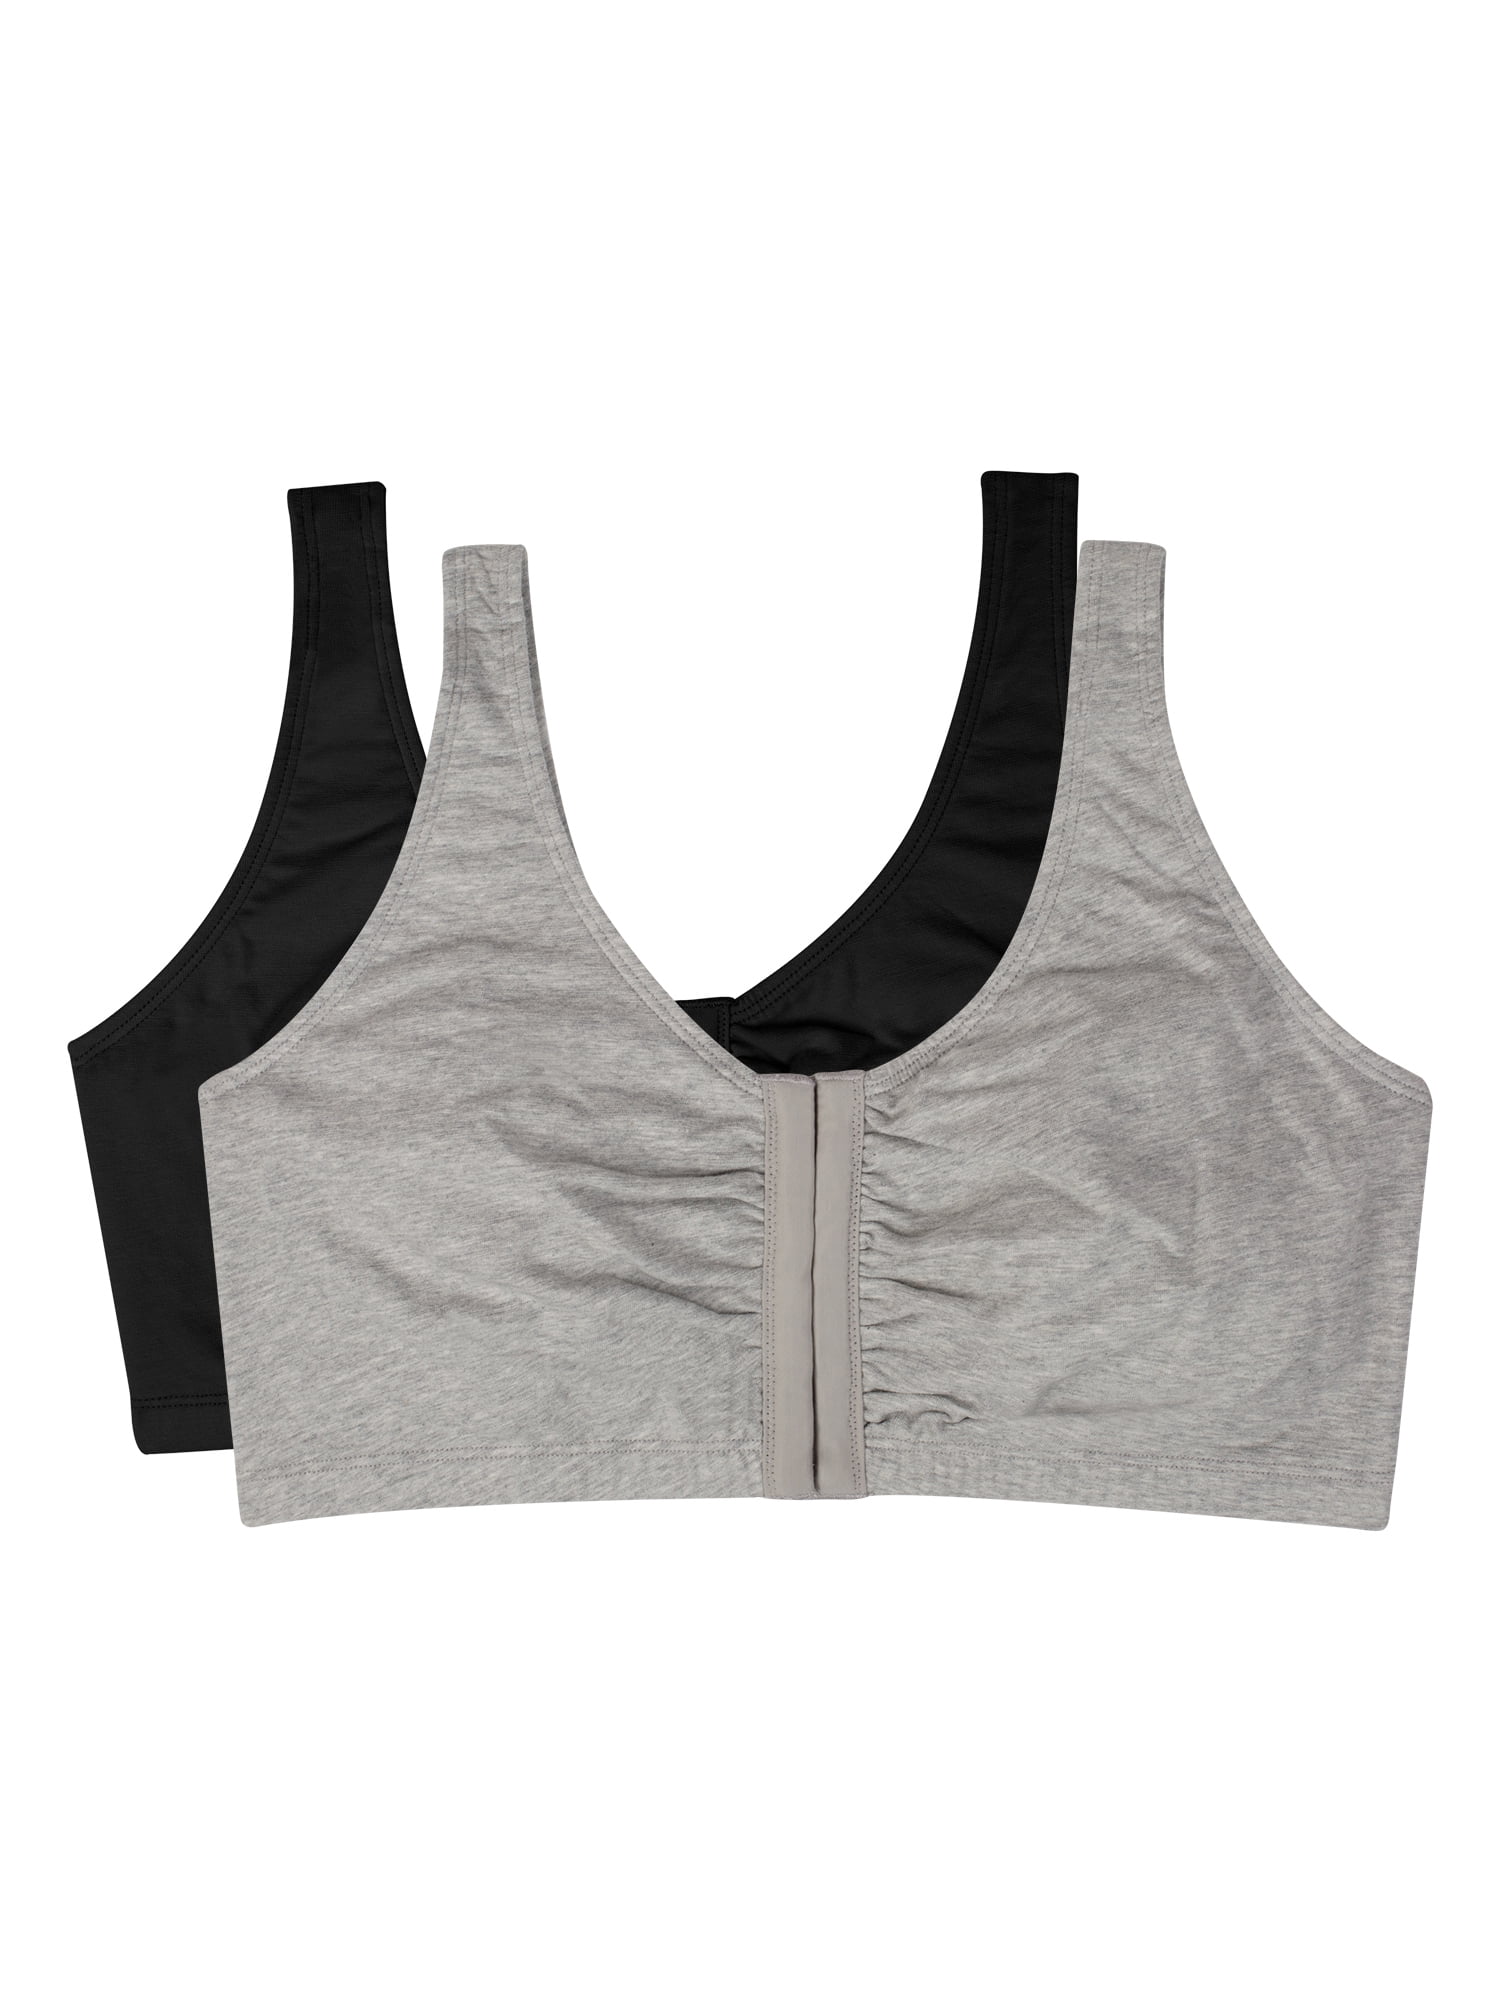 Free: High School Musical Sports Bra - Girls' Clothing -  Auctions  for Free Stuff